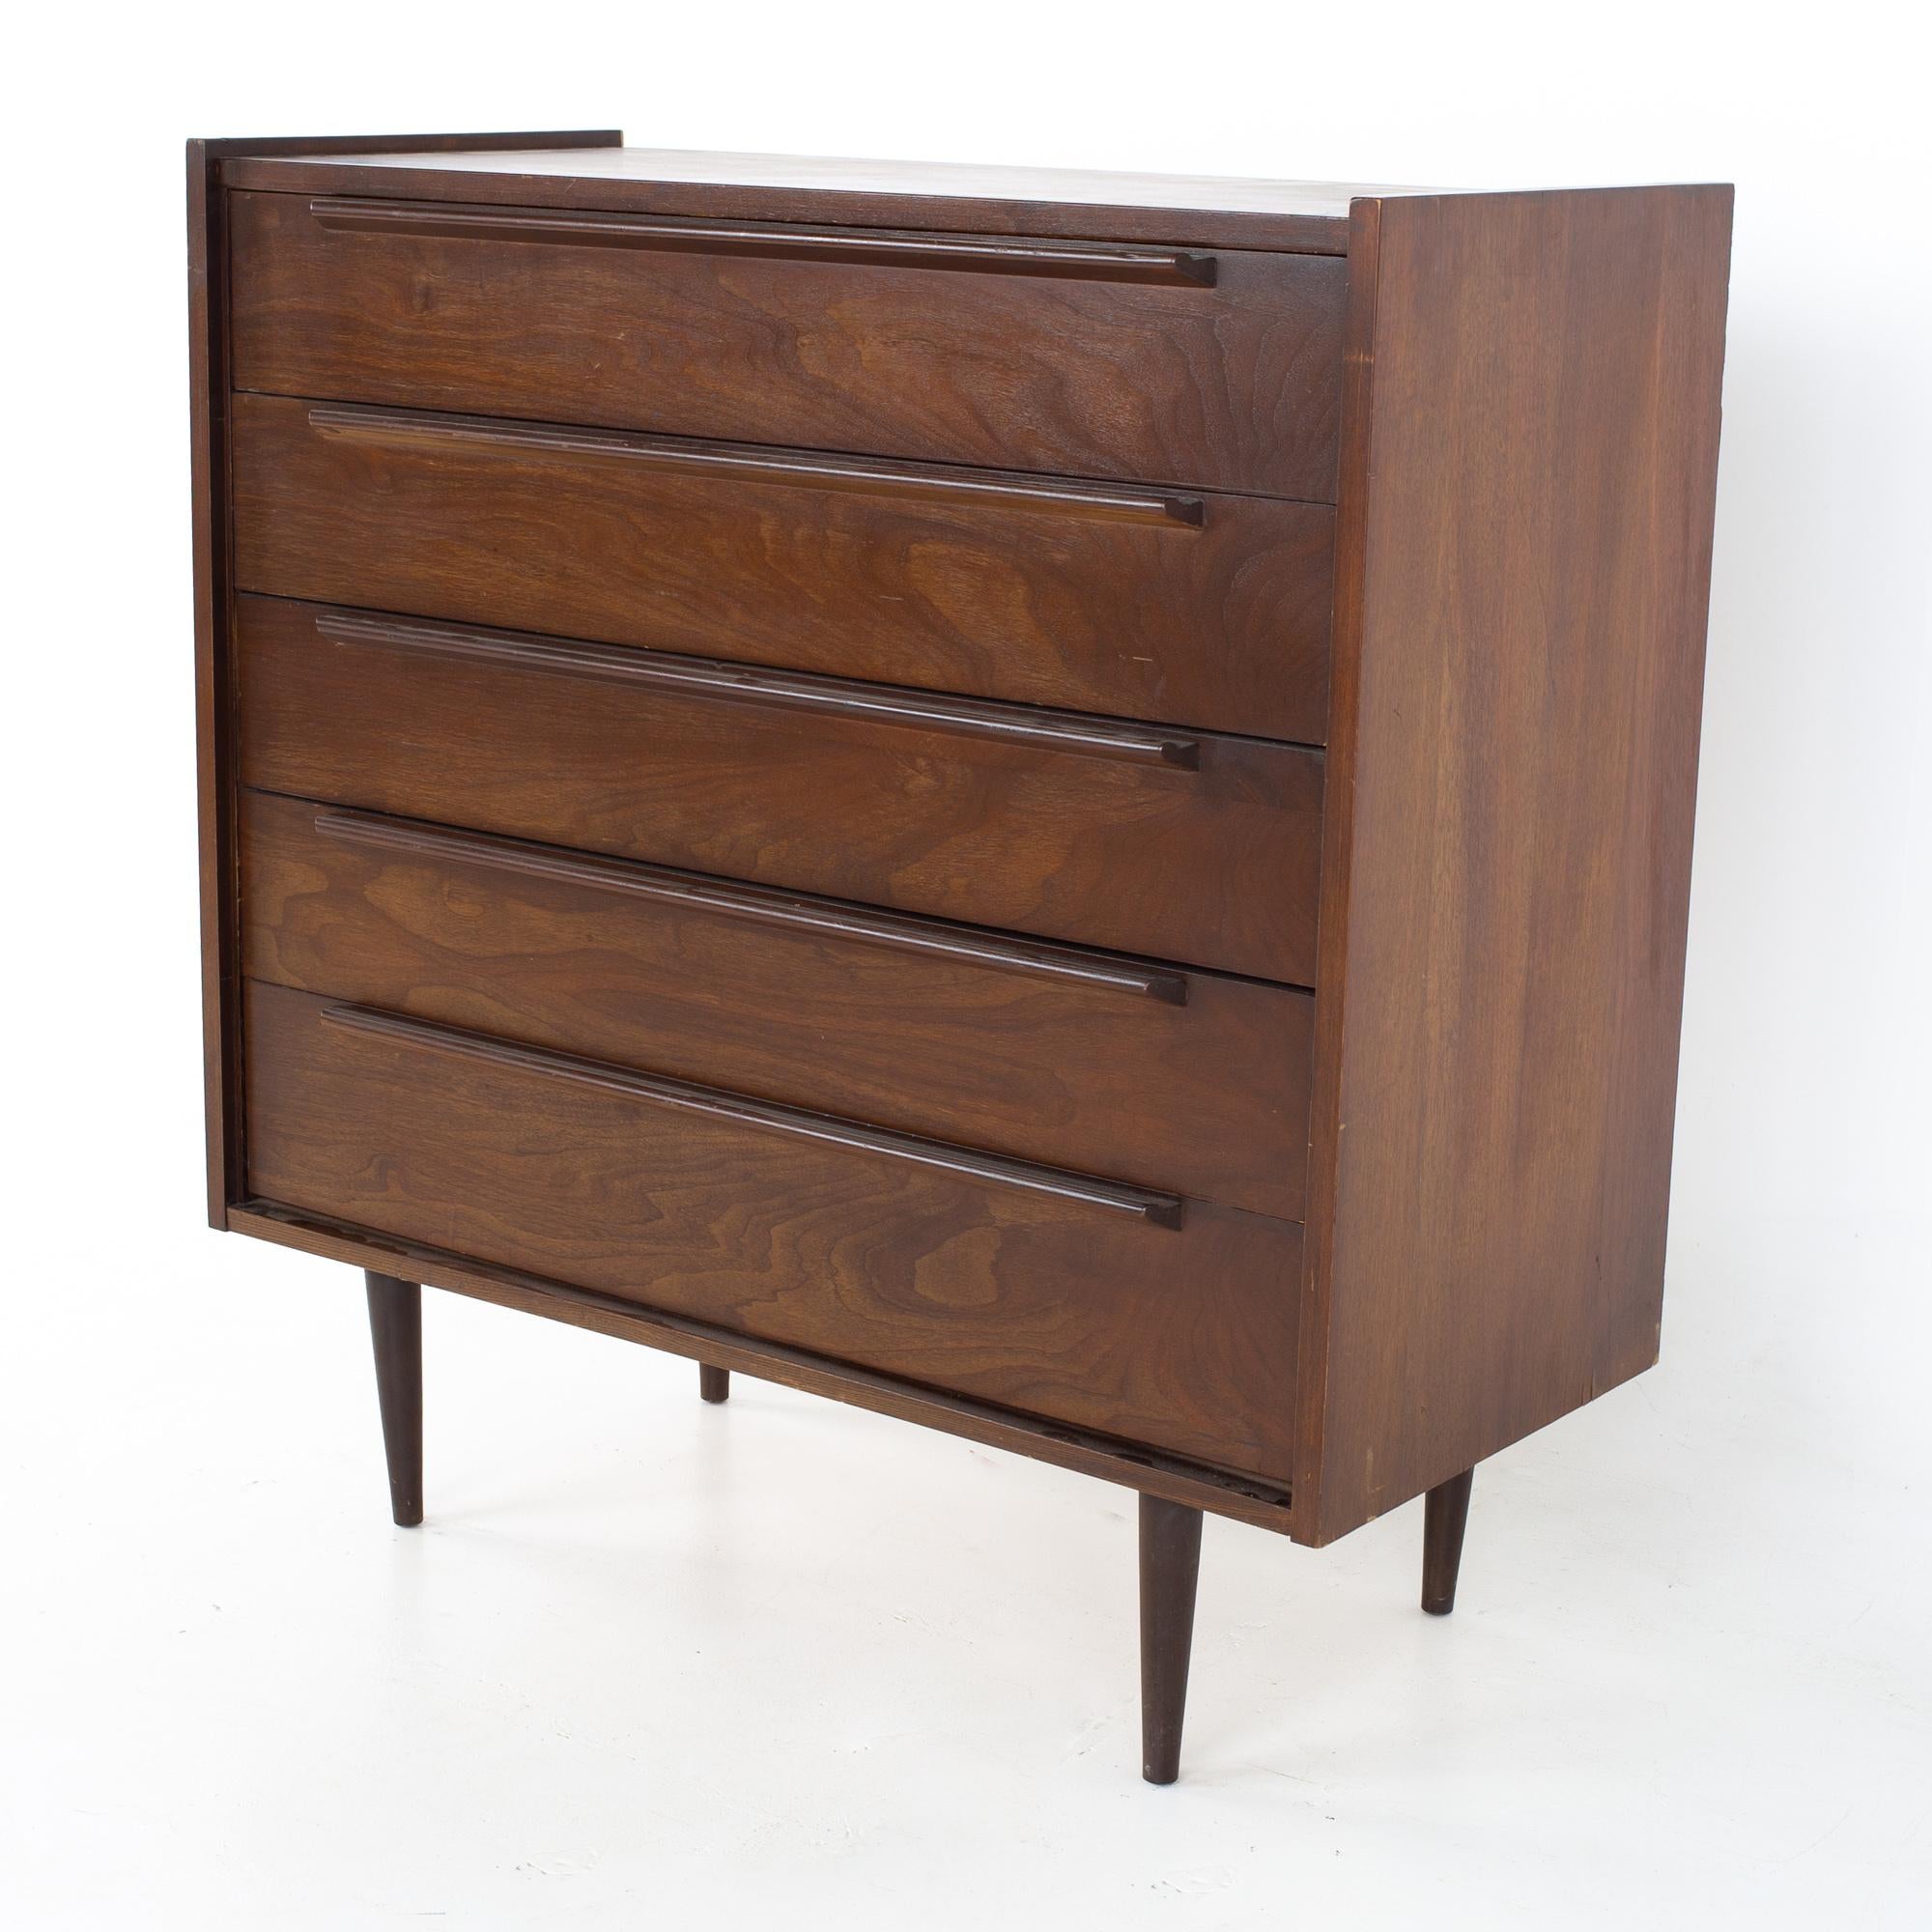 United style mid century 5 drawer walnut highboy dresser
Dresser measures: 40 wide x 18.5 deep x 42 inches high

All pieces of furniture can be had in what we call restored vintage condition. That means the piece is restored upon purchase so it’s